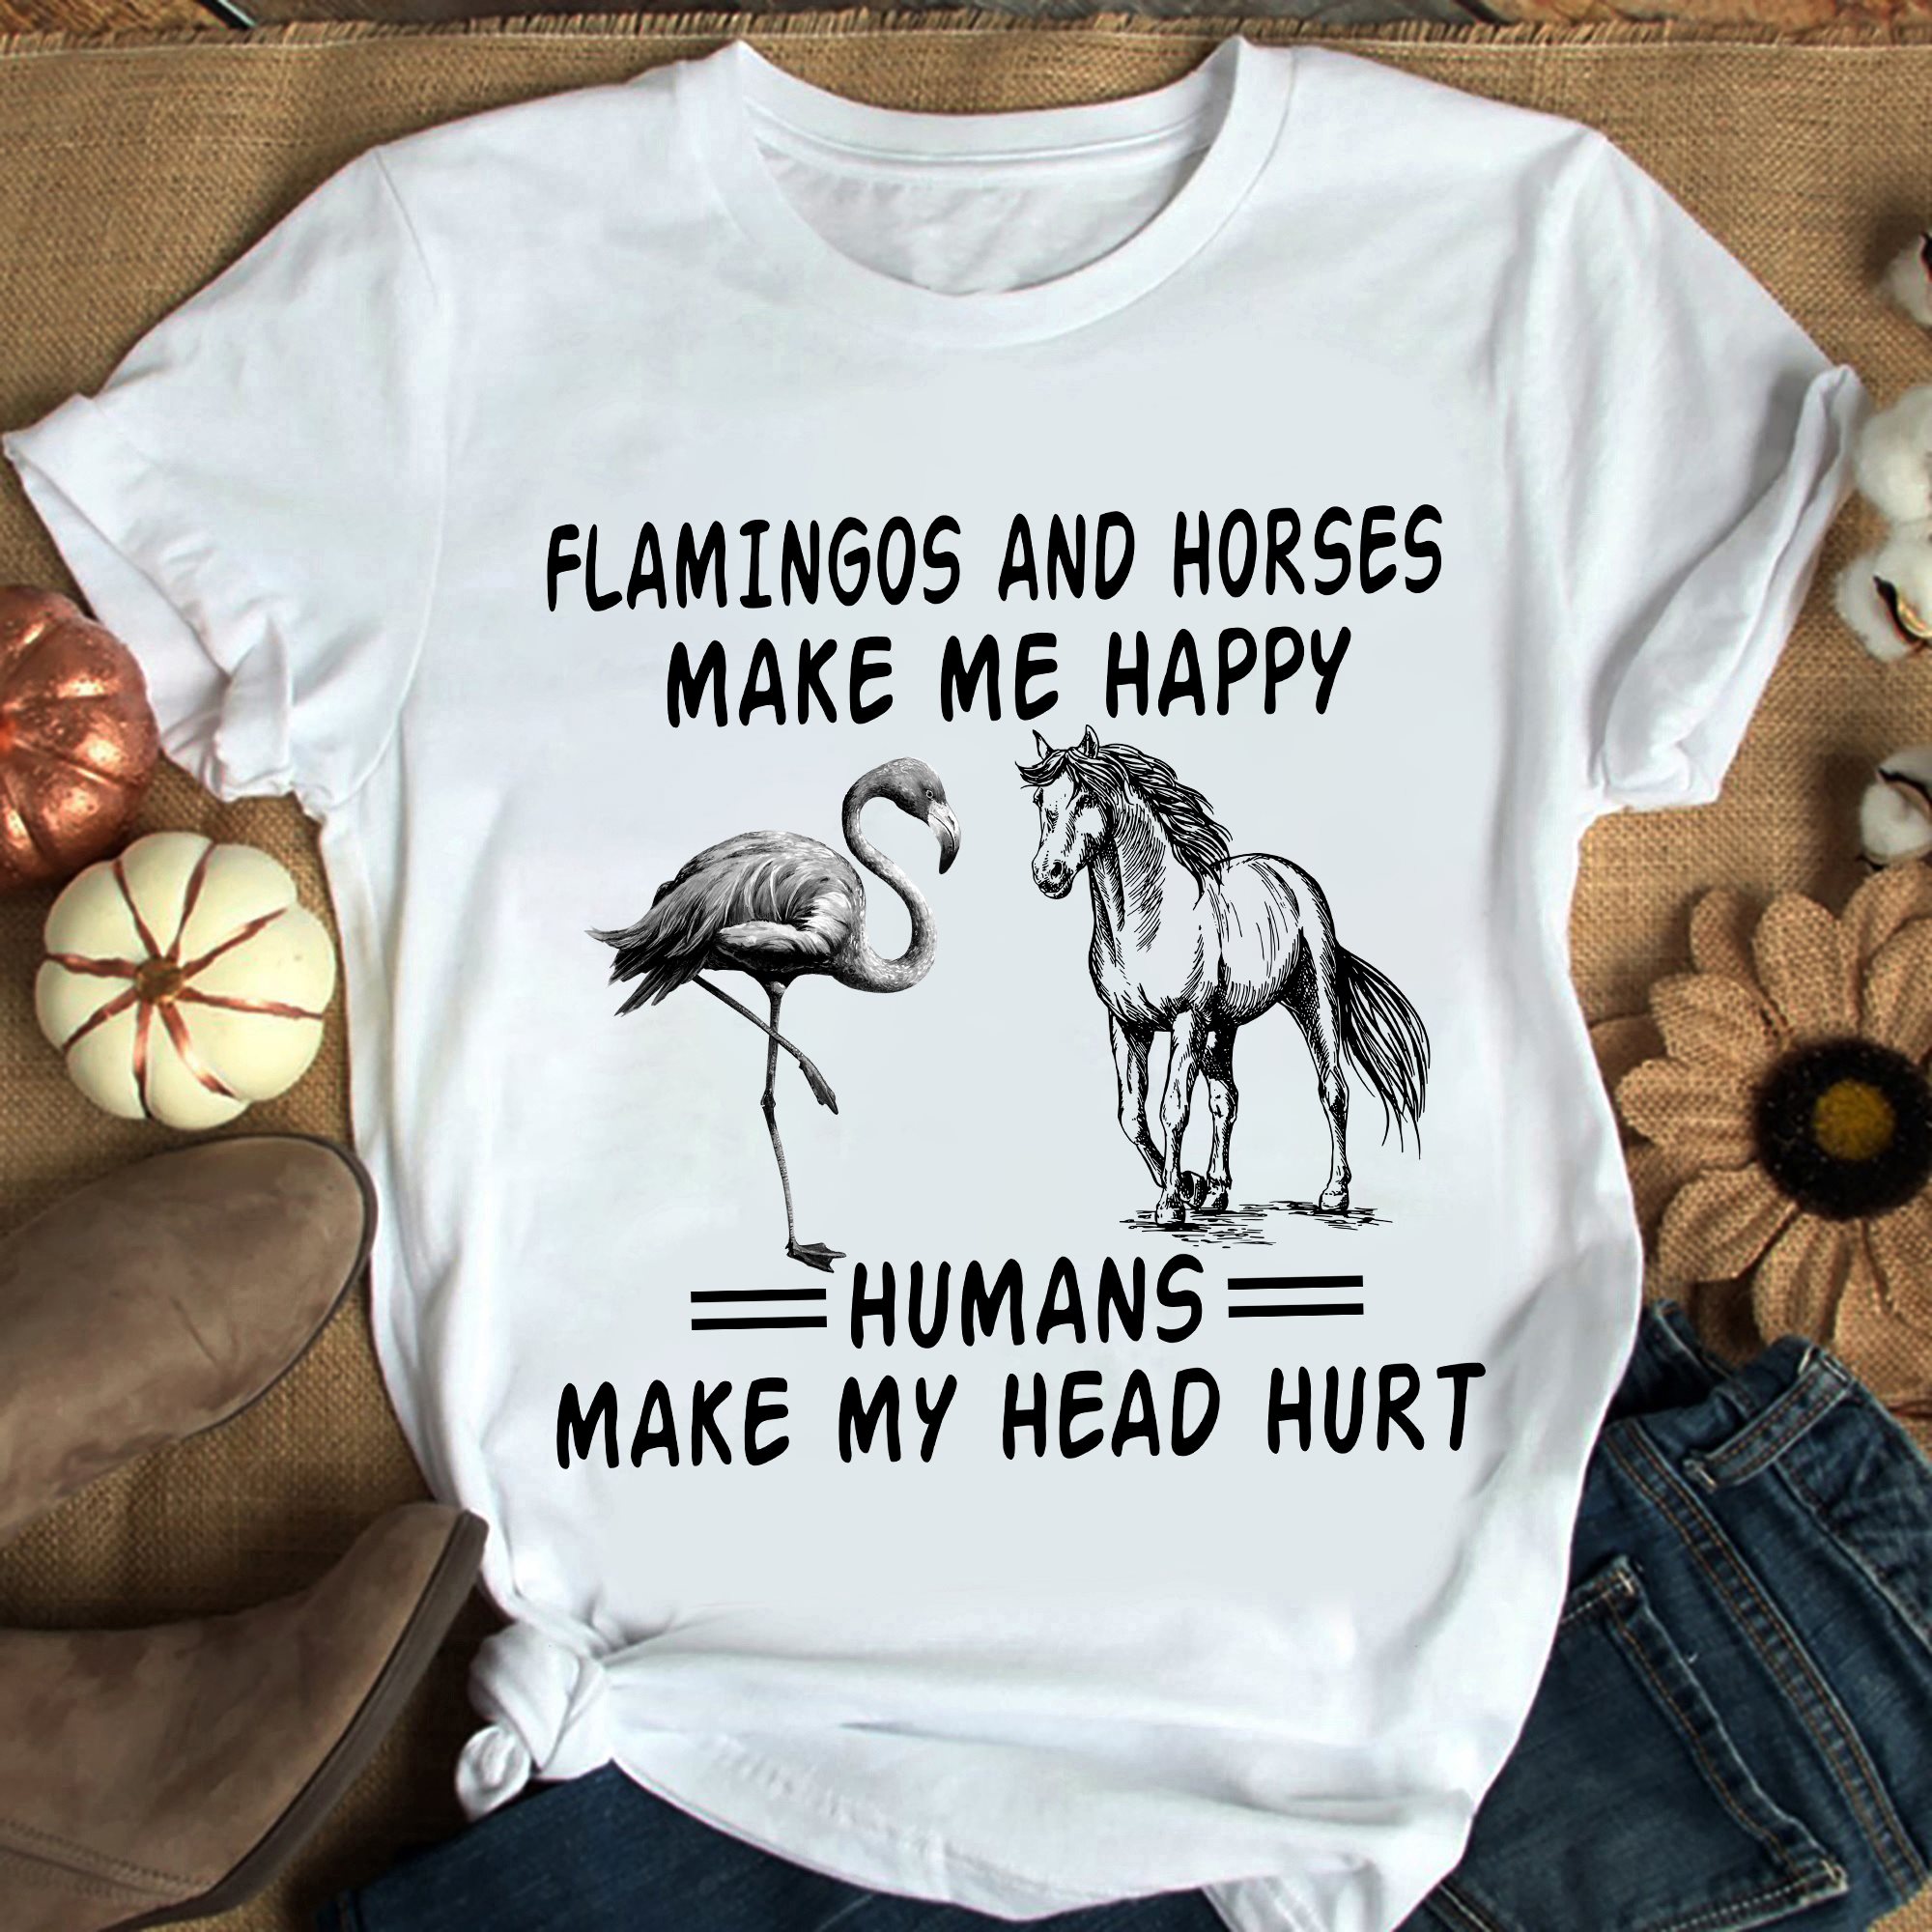 Flamingos and horses make me happy humans make my head hurt - T-shirt for horse lover